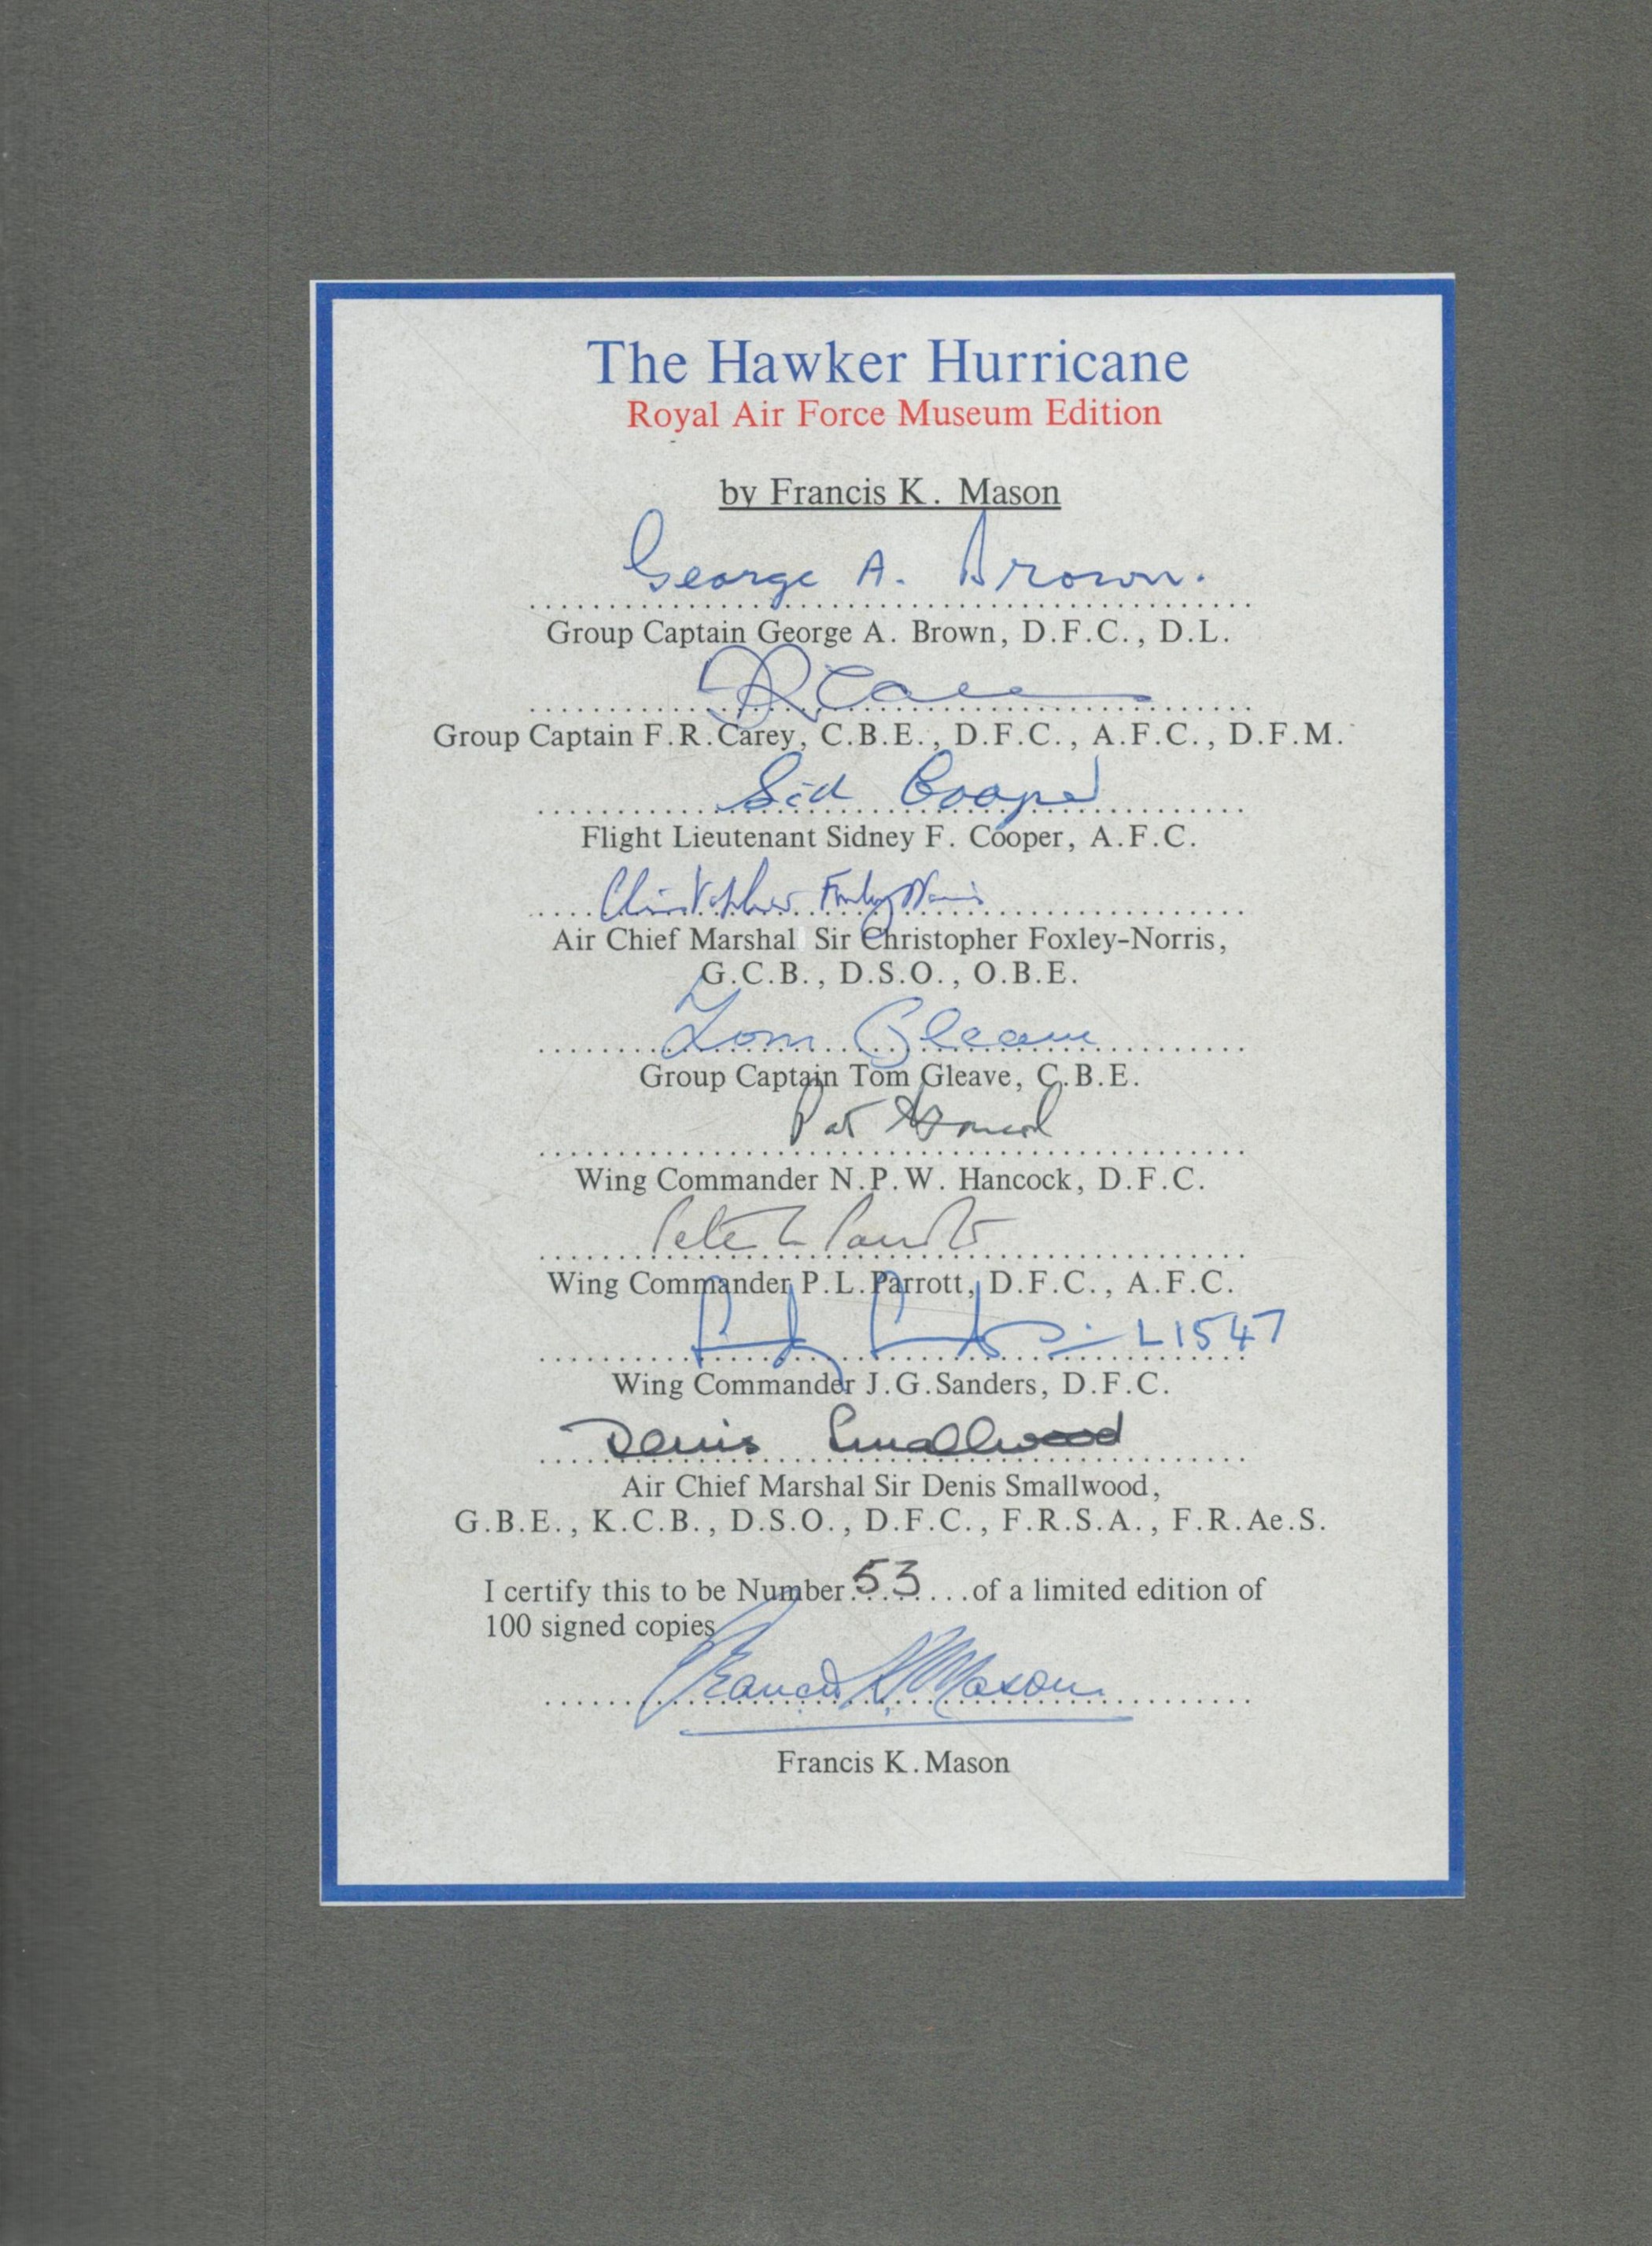 9 WW2 RAF Pilots Signed Hardback Book Titled The Hawker Hurricane By Francis K Mason. Signed on - Image 2 of 4